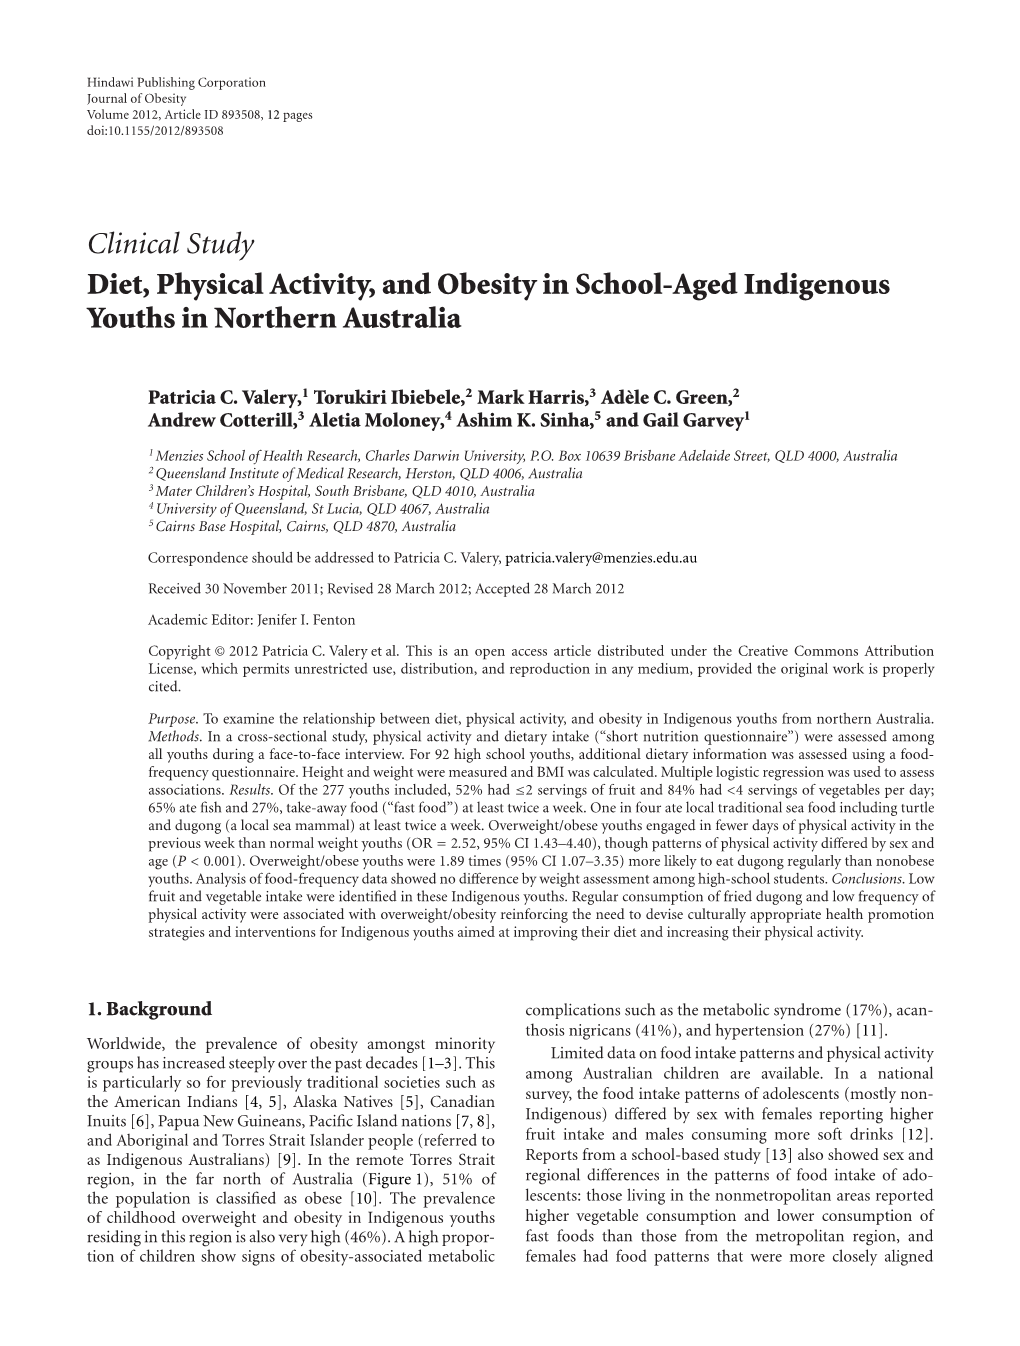 Clinical Study Diet, Physical Activity, and Obesity in School-Aged Indigenous Youths in Northern Australia